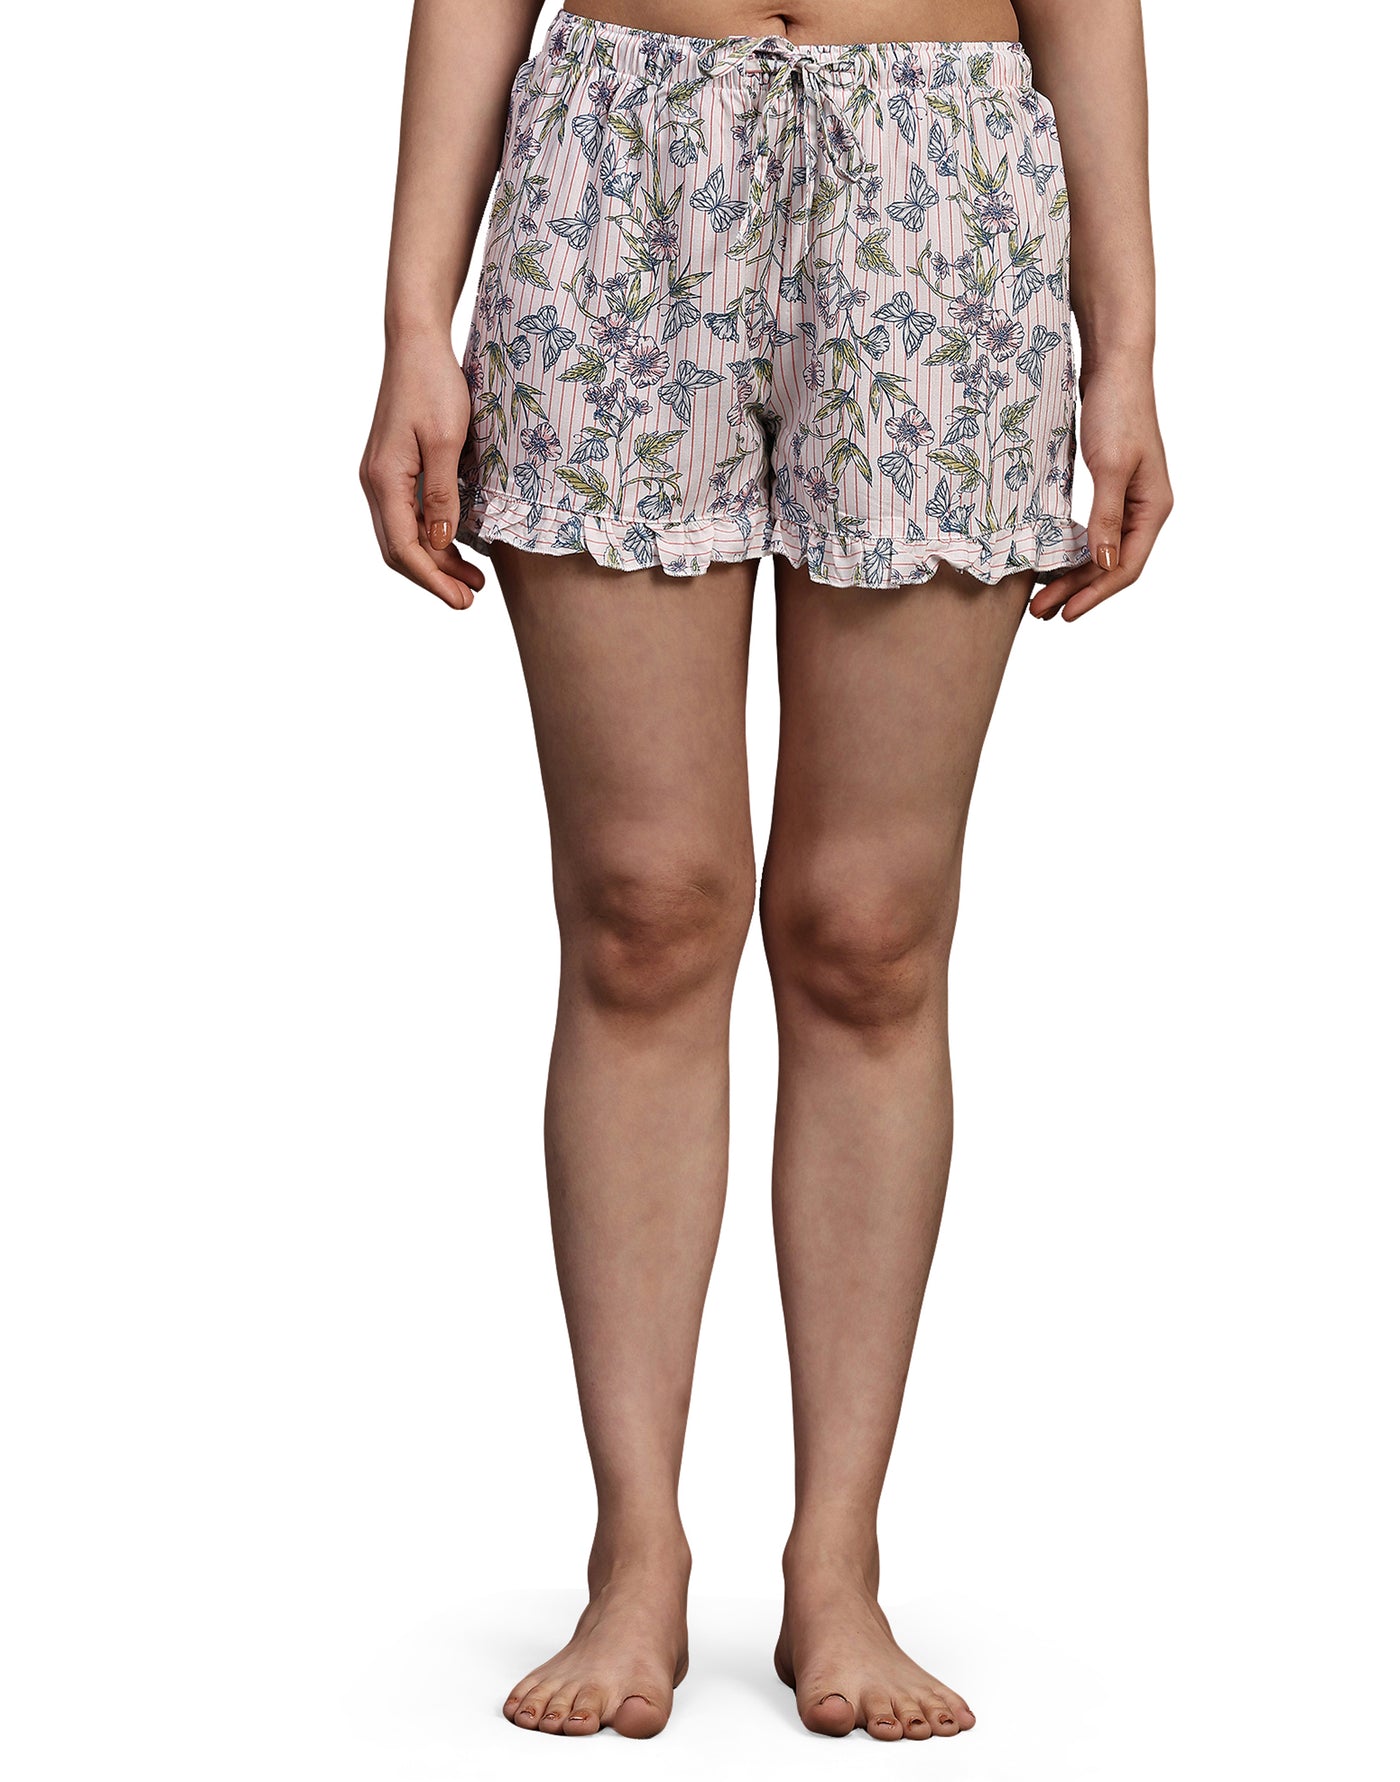 Night Suit Shorty Set for Women-White Butterfly Print